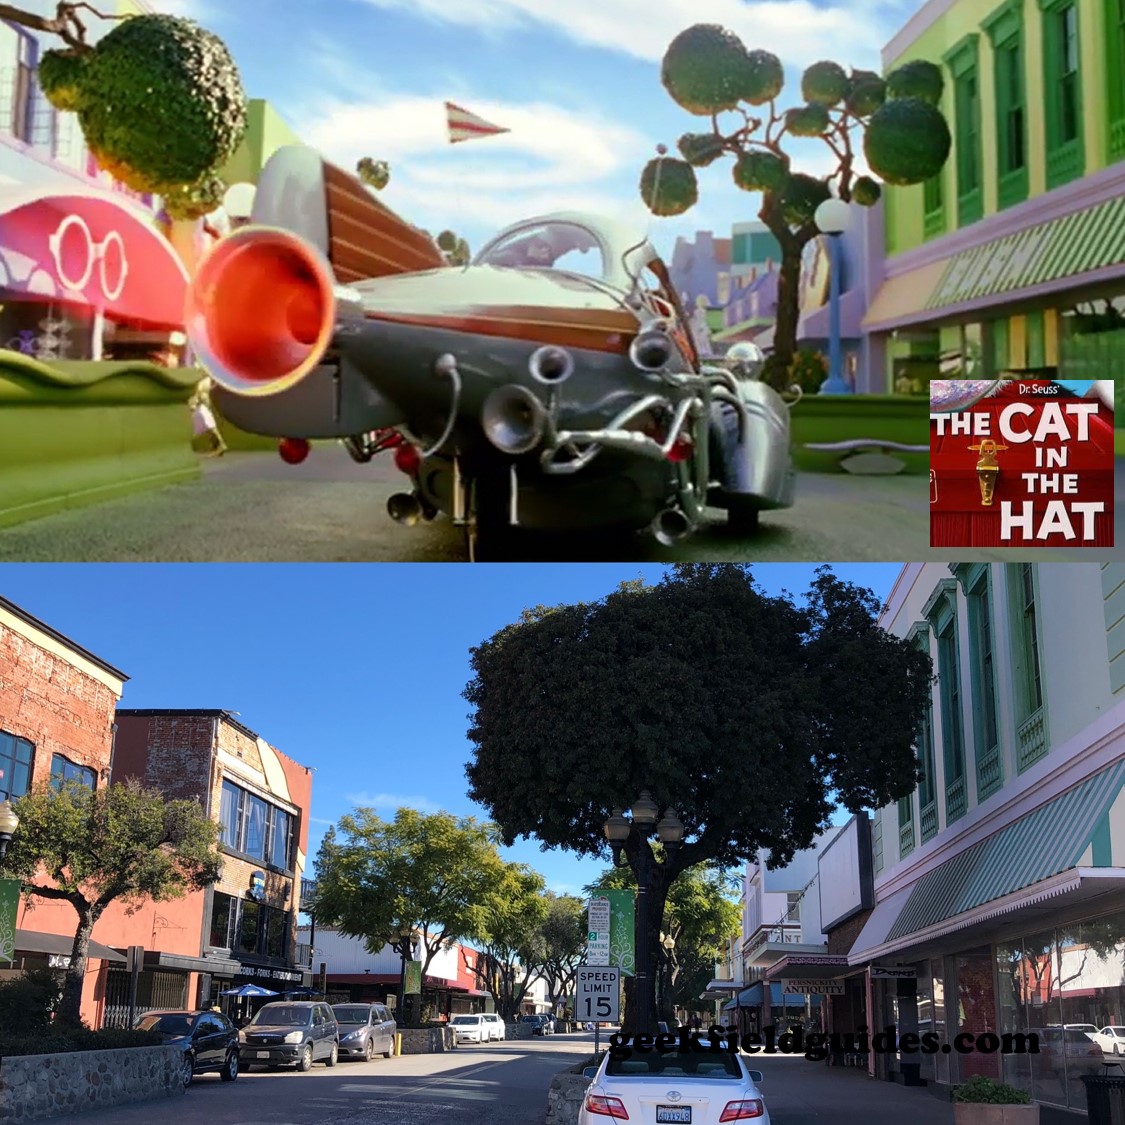 The Cat in the Hat Film Locations Geek Field Guides